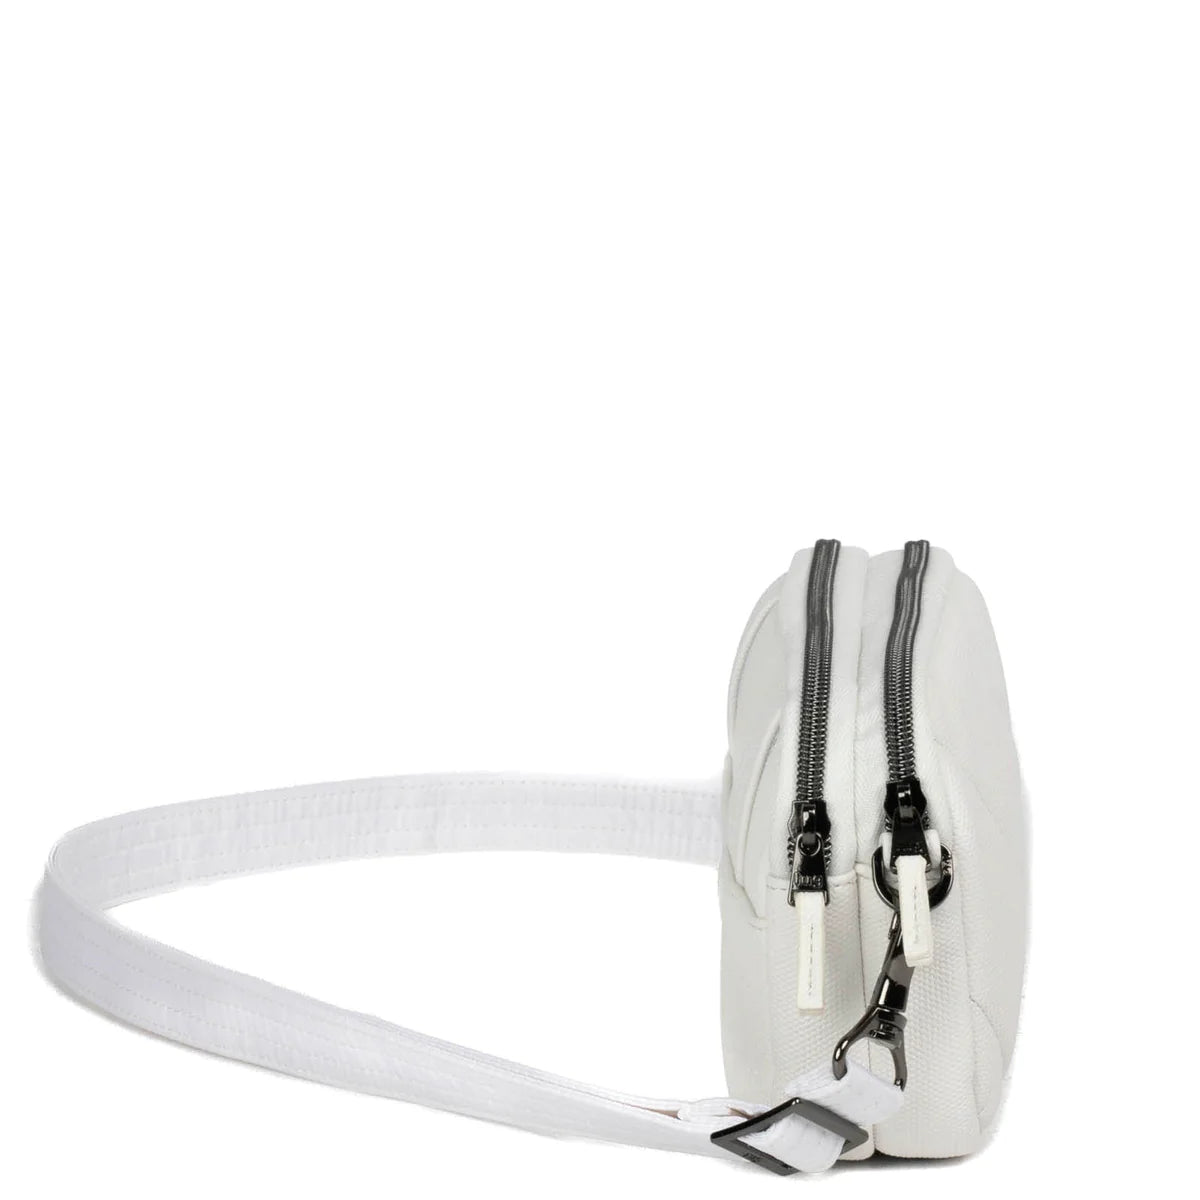 LUG Coupe Matte Luxe VL Convertible Crossbody Bag in White